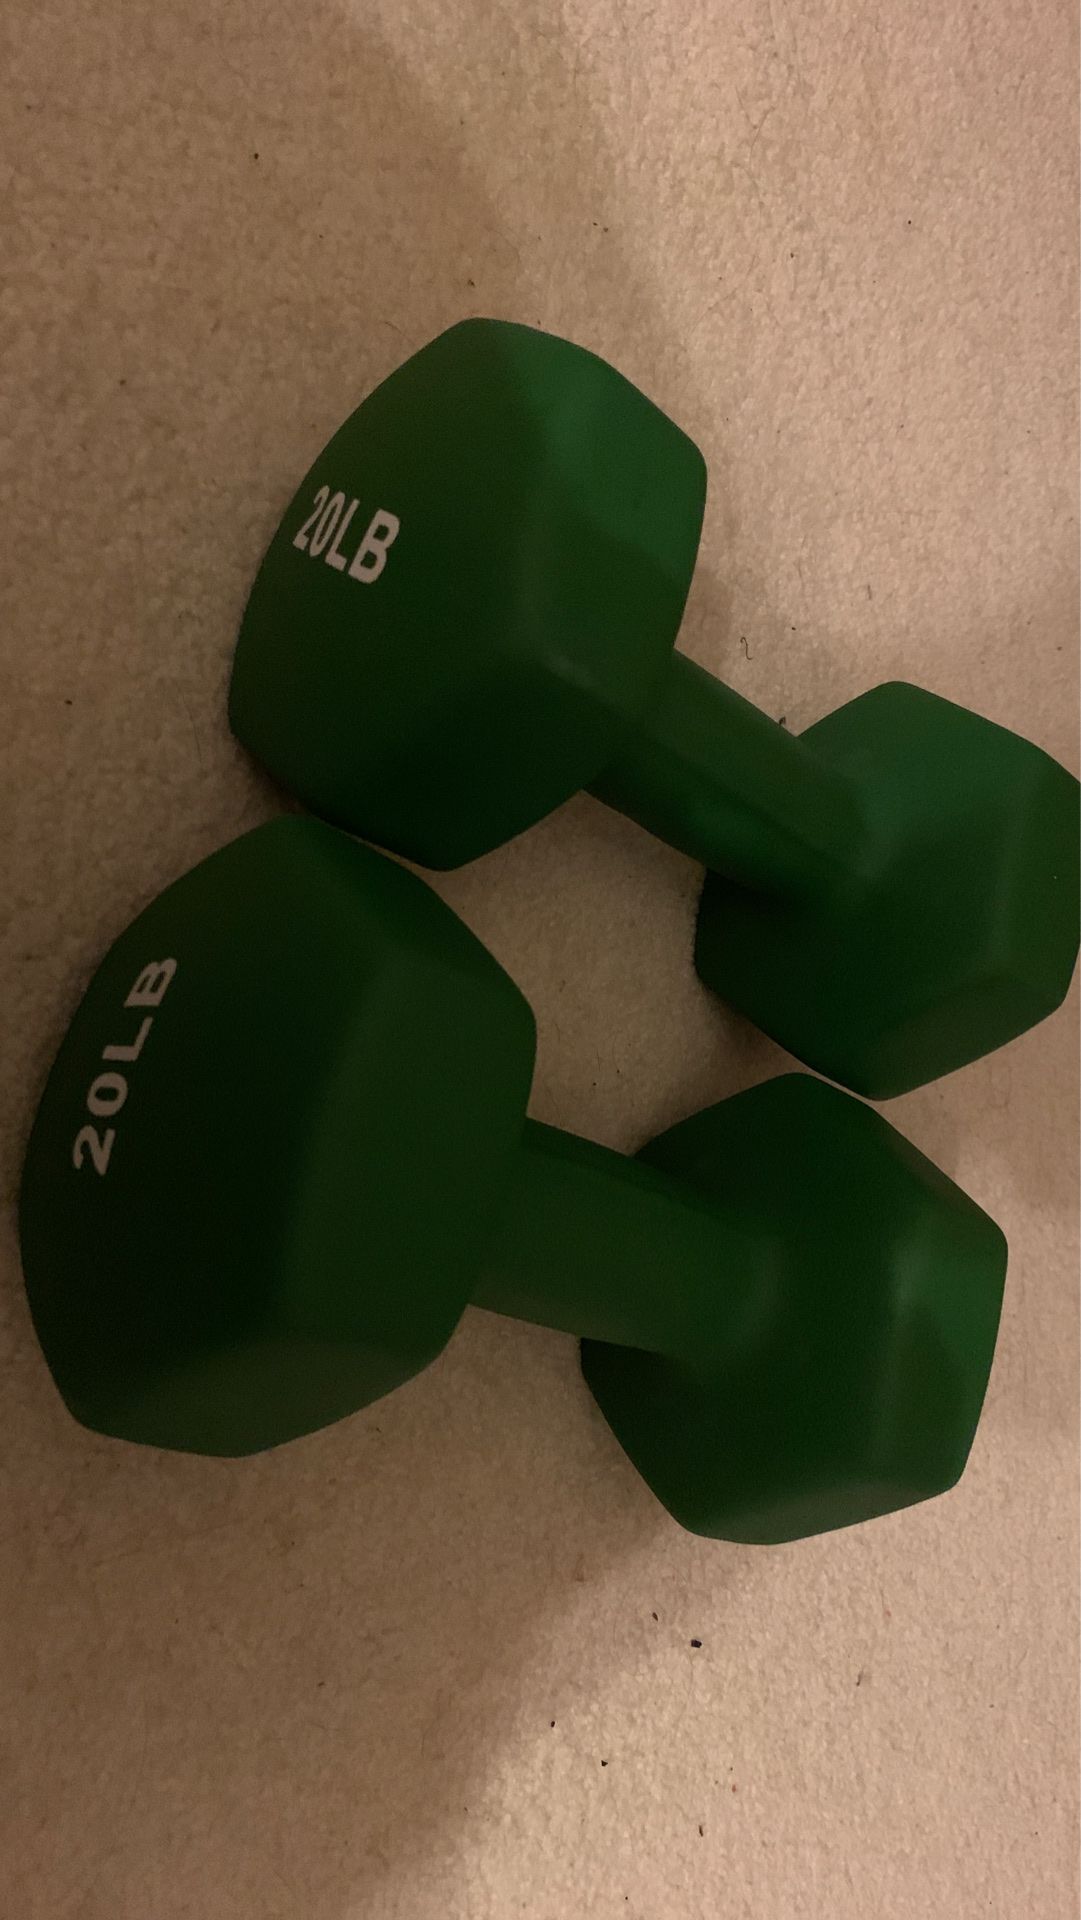 1 Pair of 20 Pound Dumbbells (from Amazon)